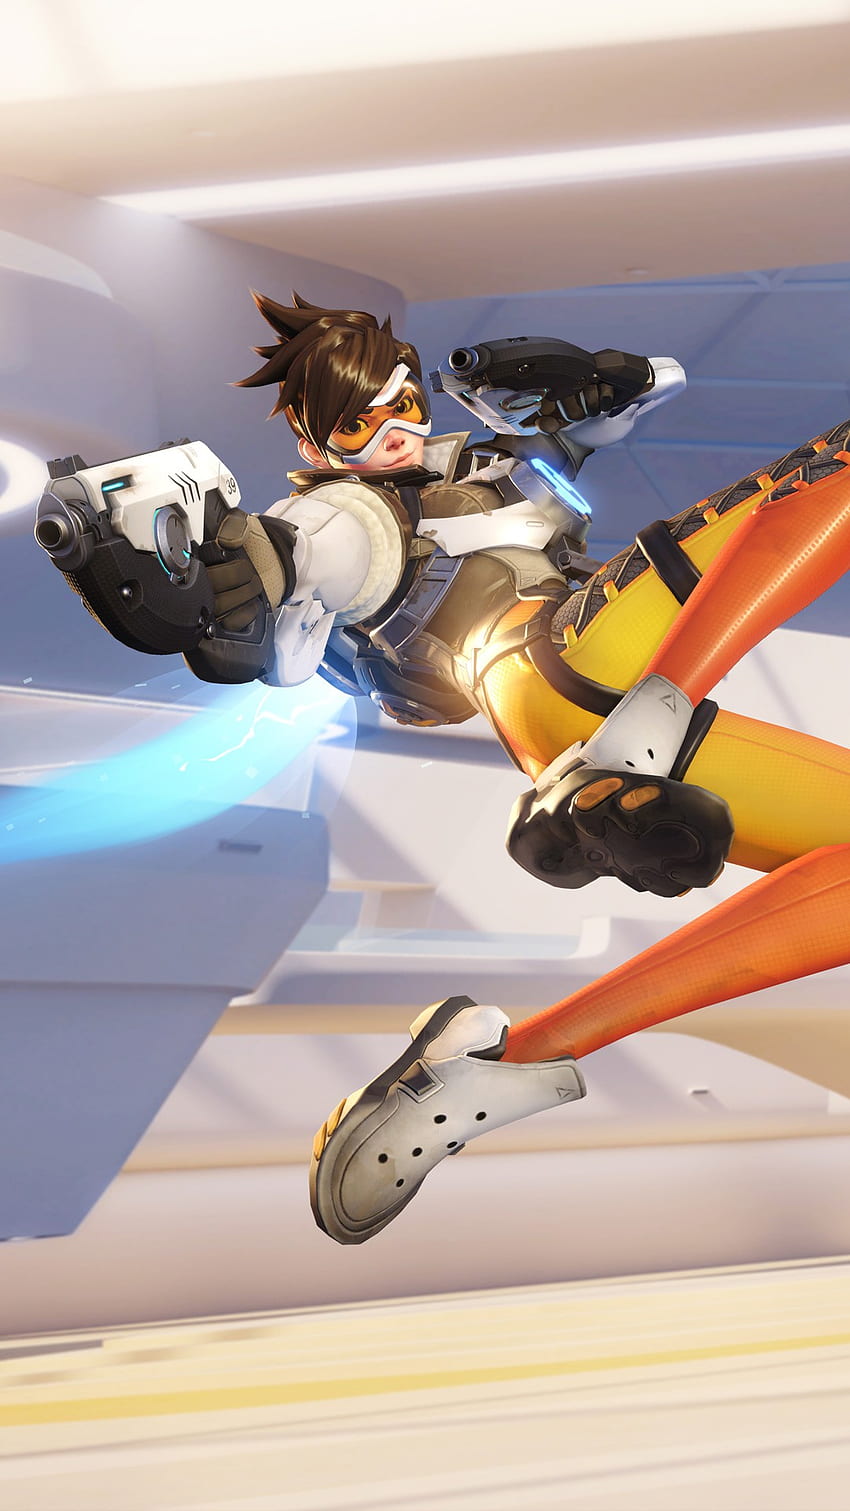 460+ Tracer (Overwatch) HD Wallpapers and Backgrounds